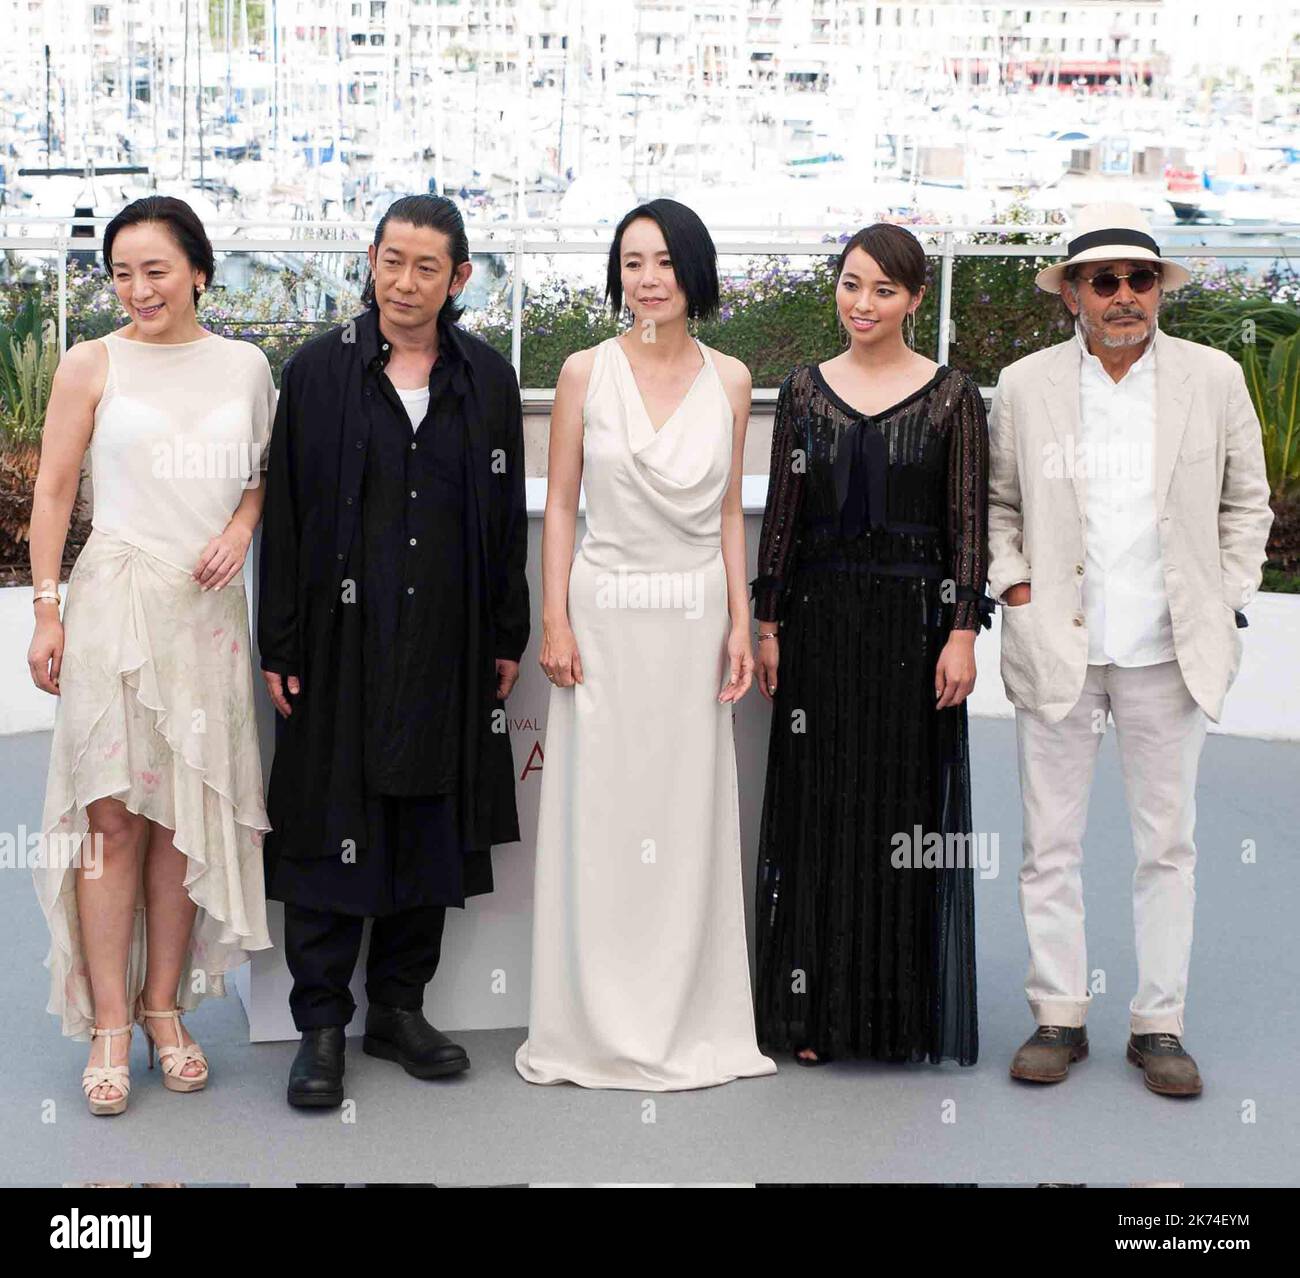 Actors Nagase Masatoshi, Misuzu Kanno and Ayame Misaki attend the 'Hikari (Radiance)' photocall during the 70th annual Cannes Film Festival at Palais des Festivals Stock Photo